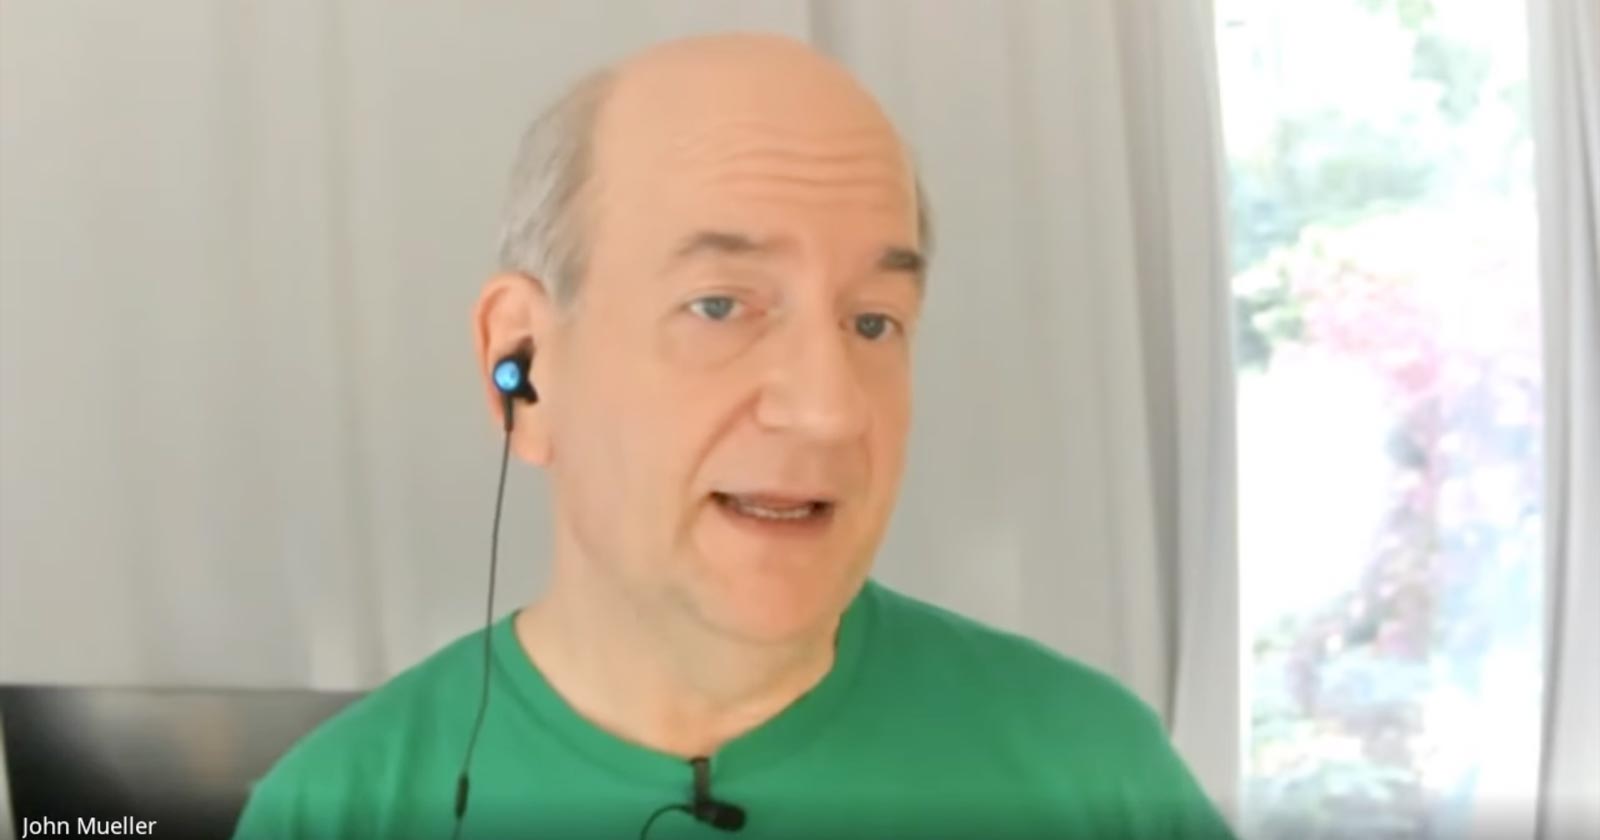 Technical Issues Usually Not a Trigger for Core Update Problems via @sejournal, @martinibuster